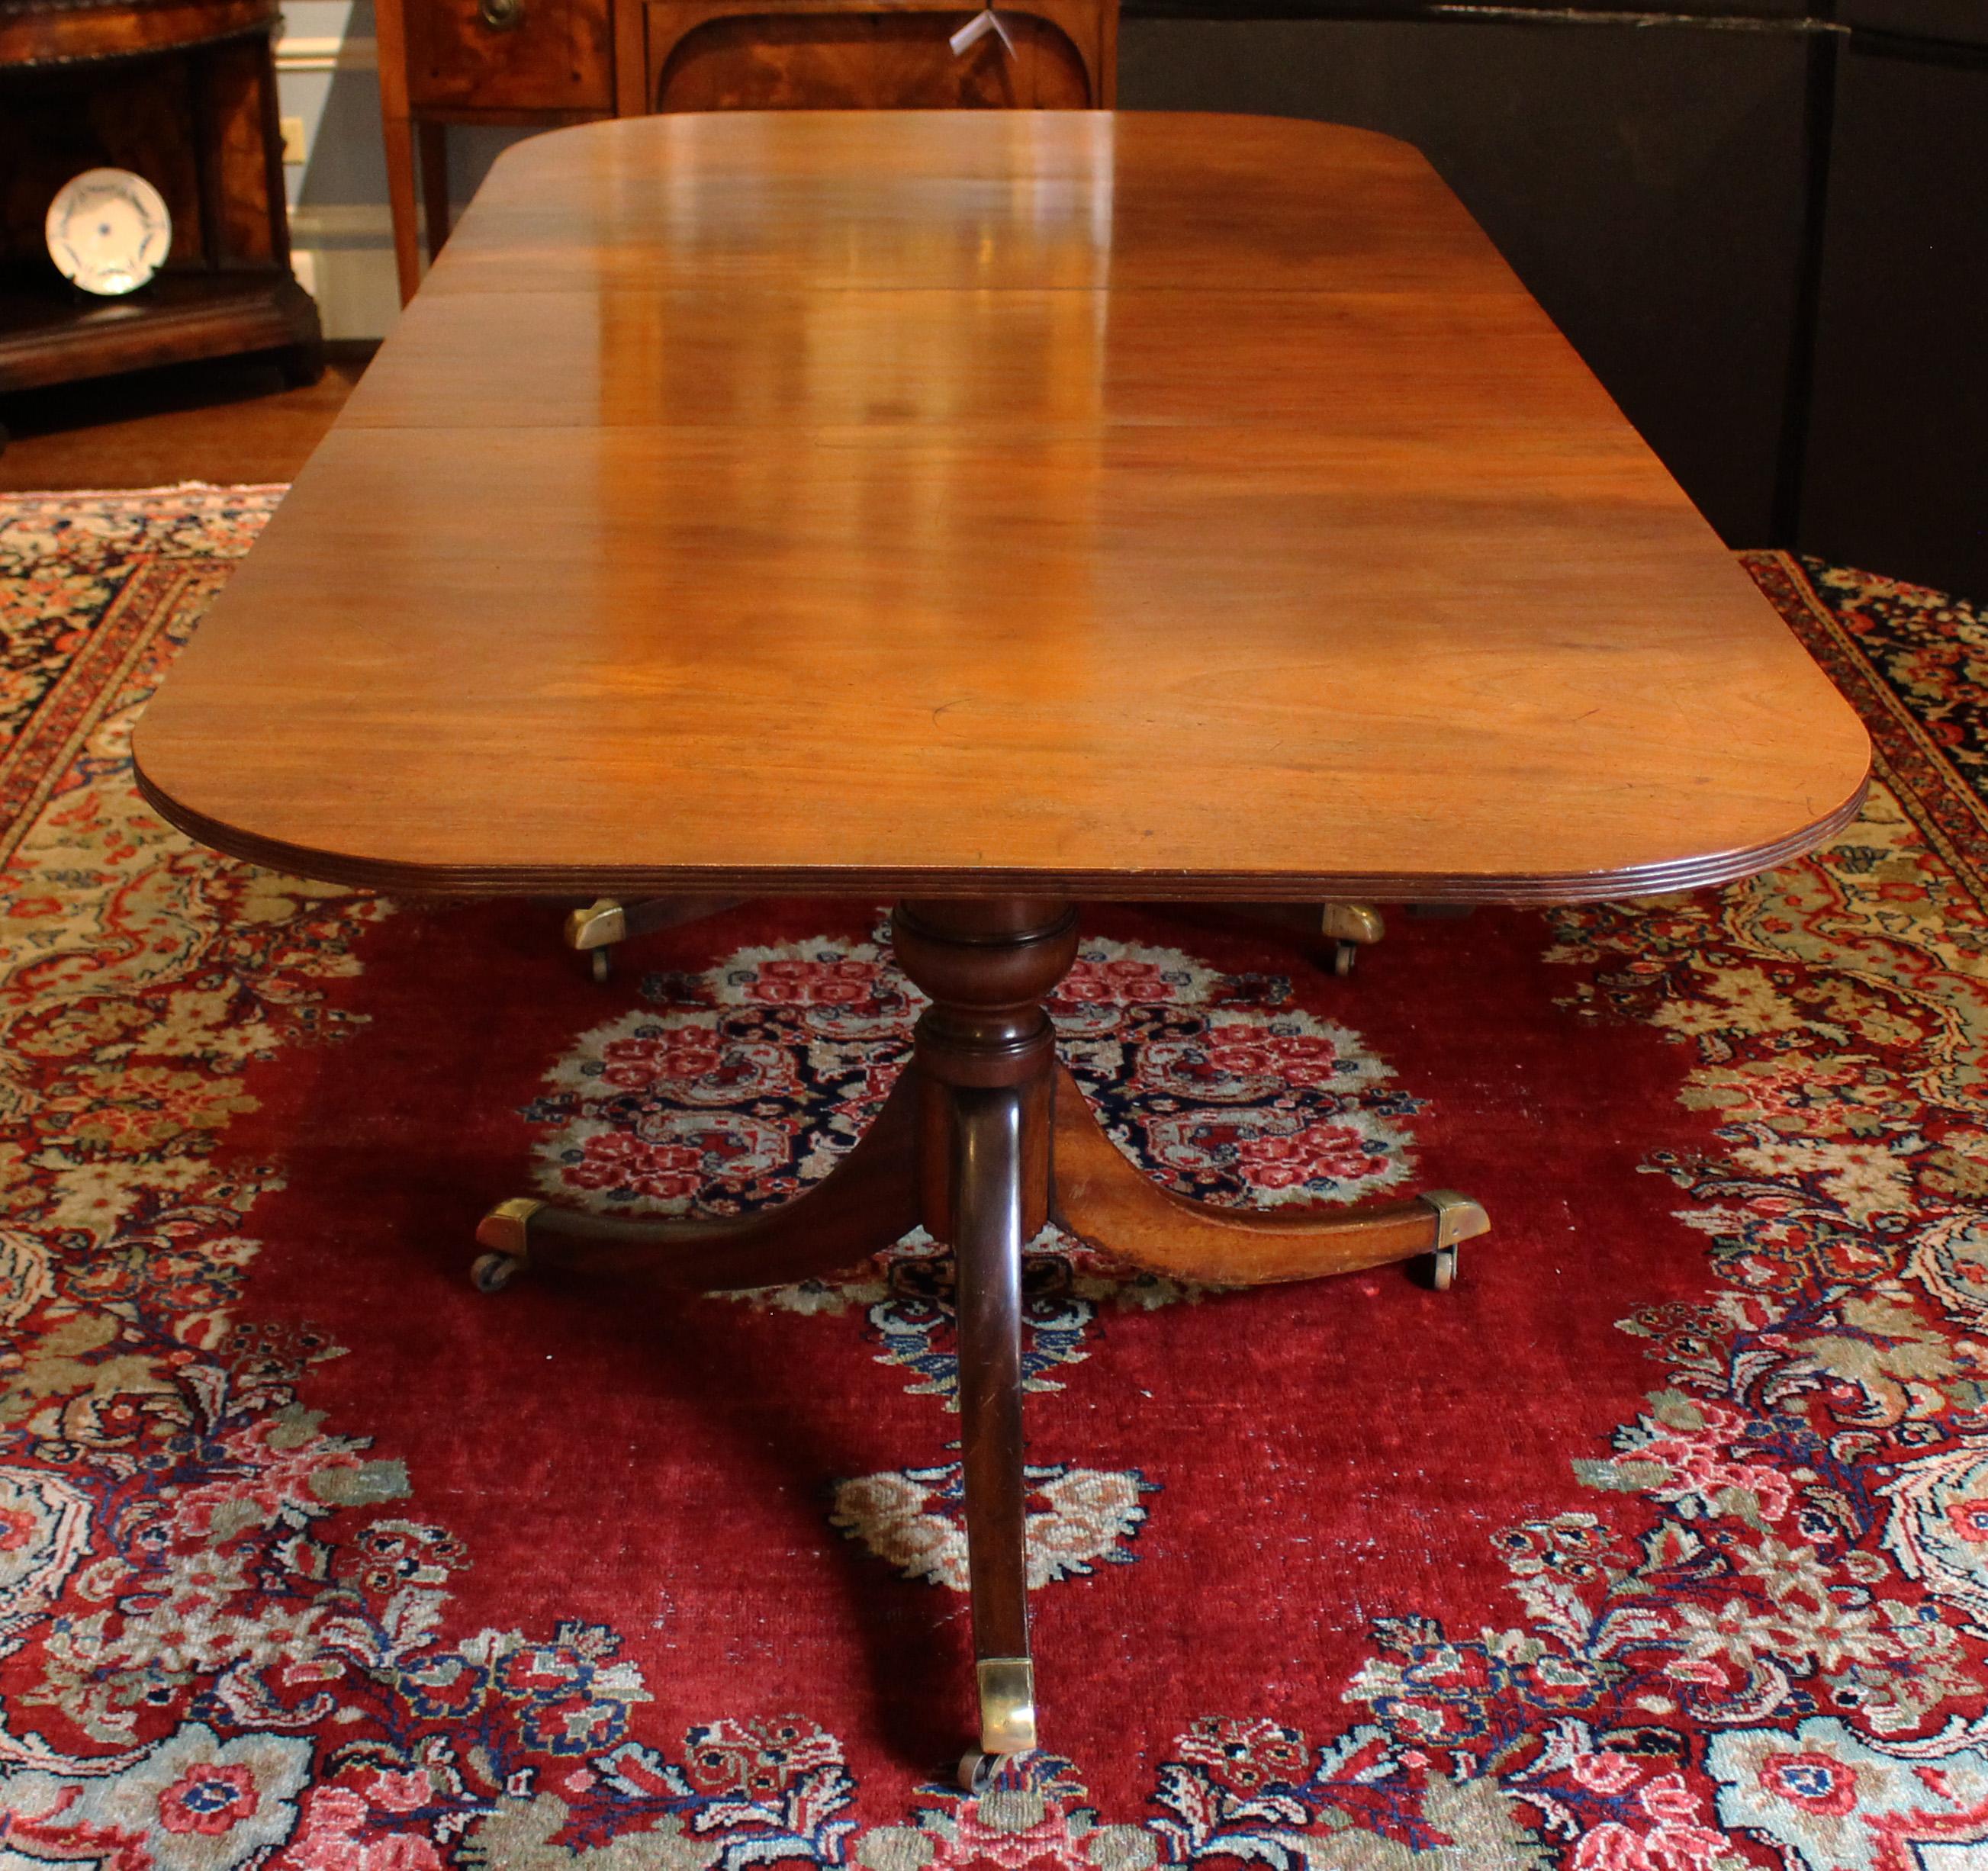 Early 19th century George III double pedestal dining table, English. Solid mahogany. A handsome example with urn form pedestals sweeping to tripod bases with simple brass caps & casters. Alterations over the generations reduced the size (thus the